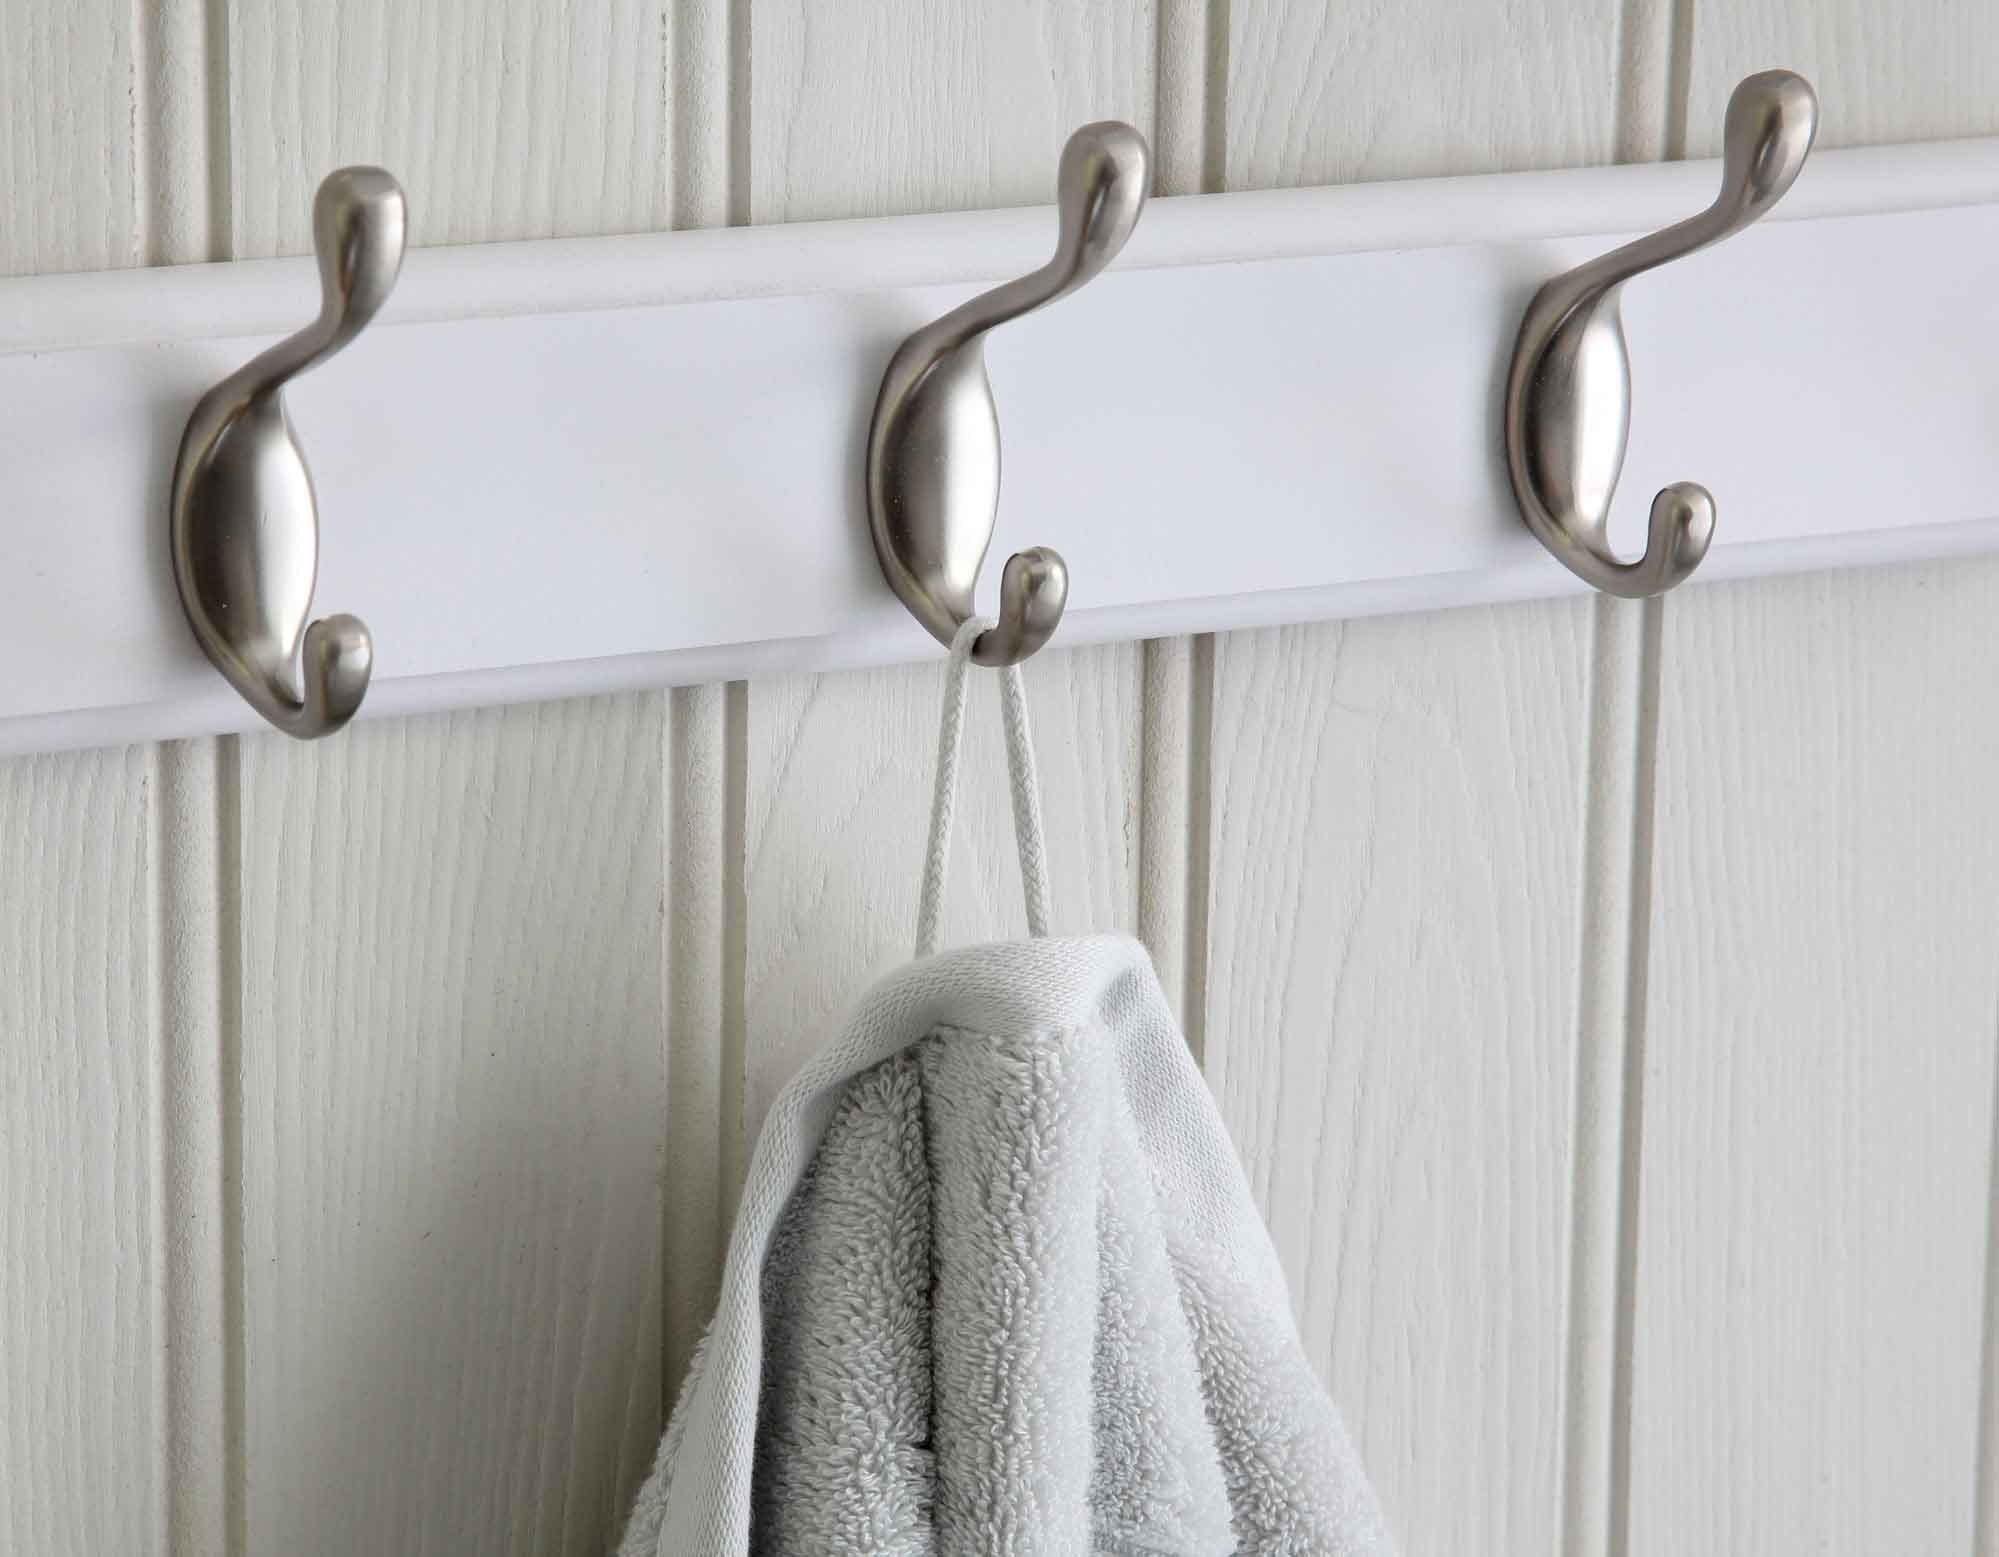 Pearl grey bath towel hanging from a wall hook by cotton loop